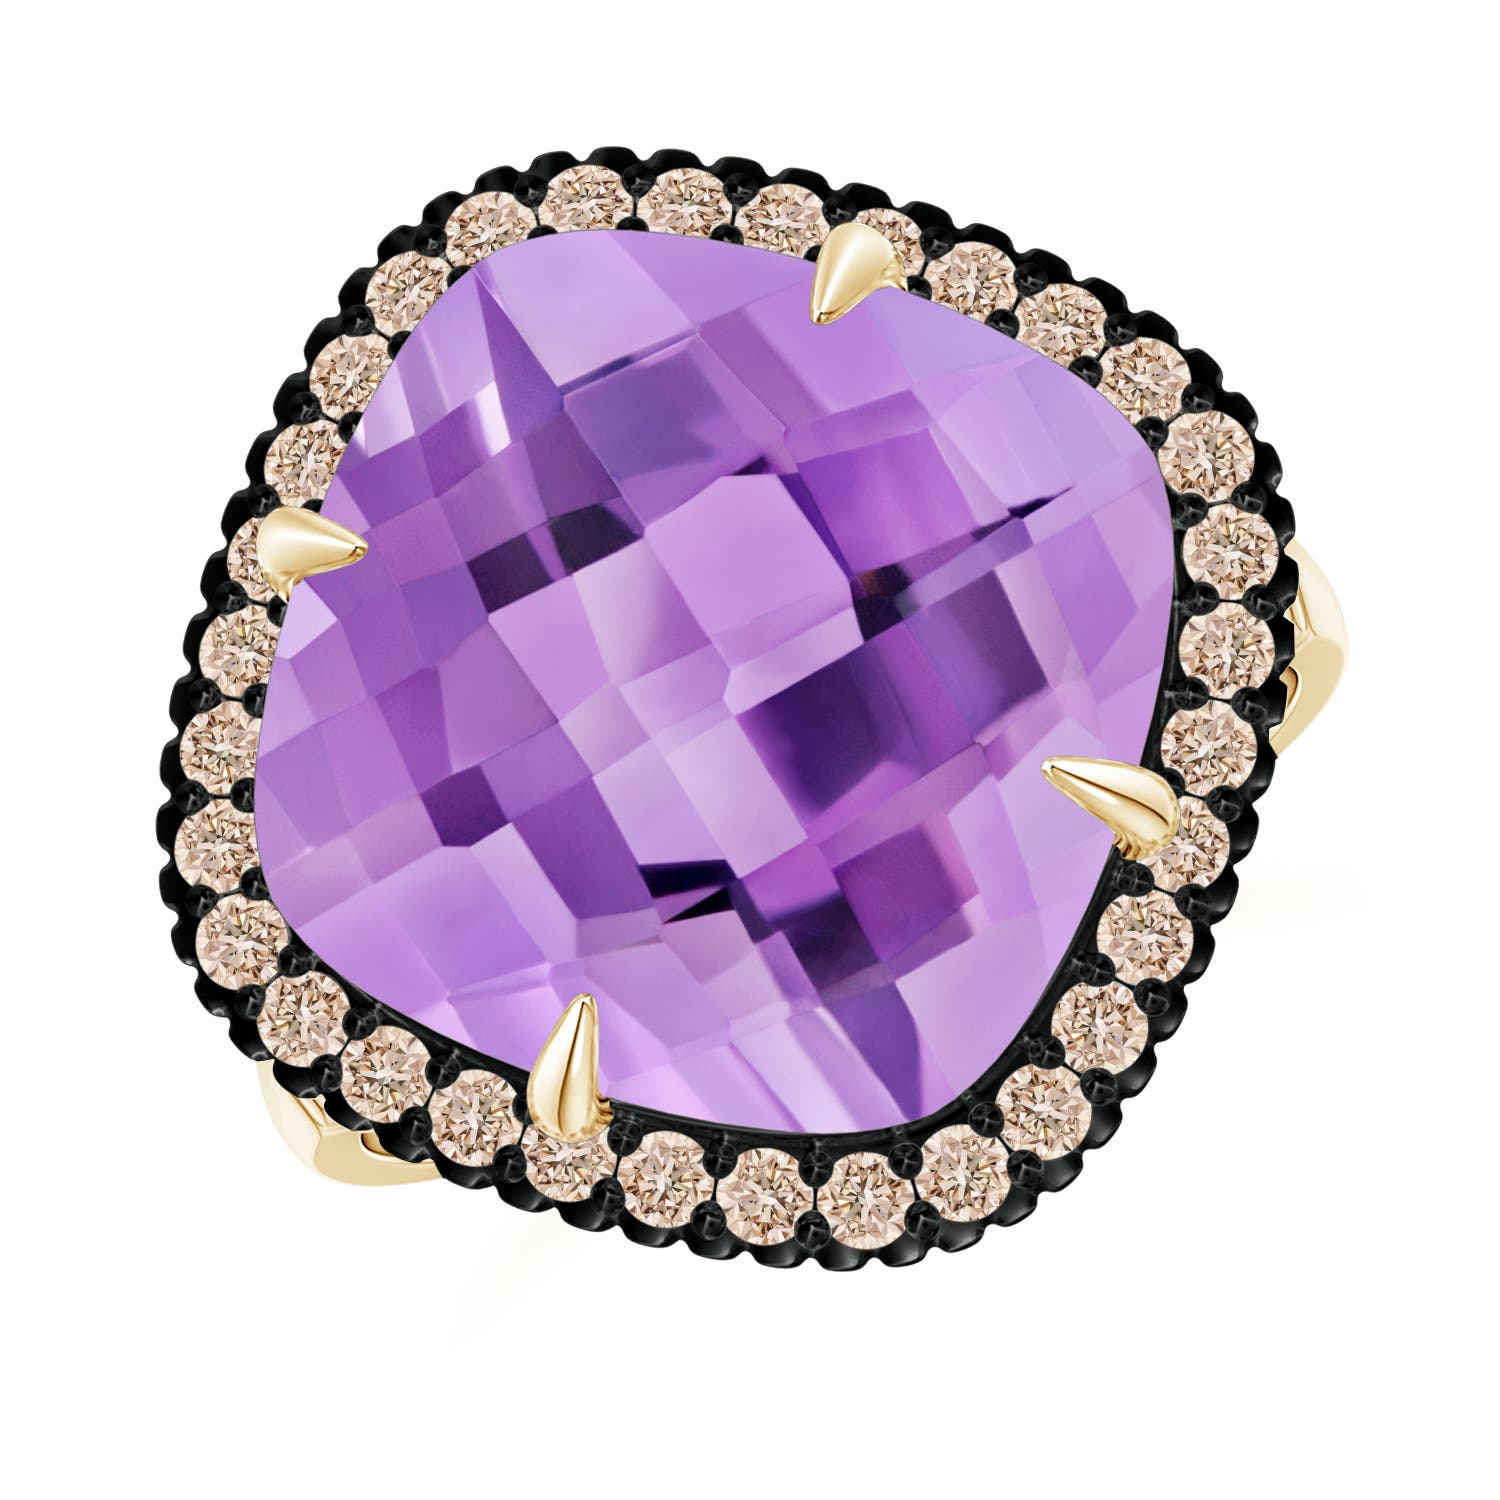 A - Amethyst / 8.38 CT / 14 KT Yellow Gold